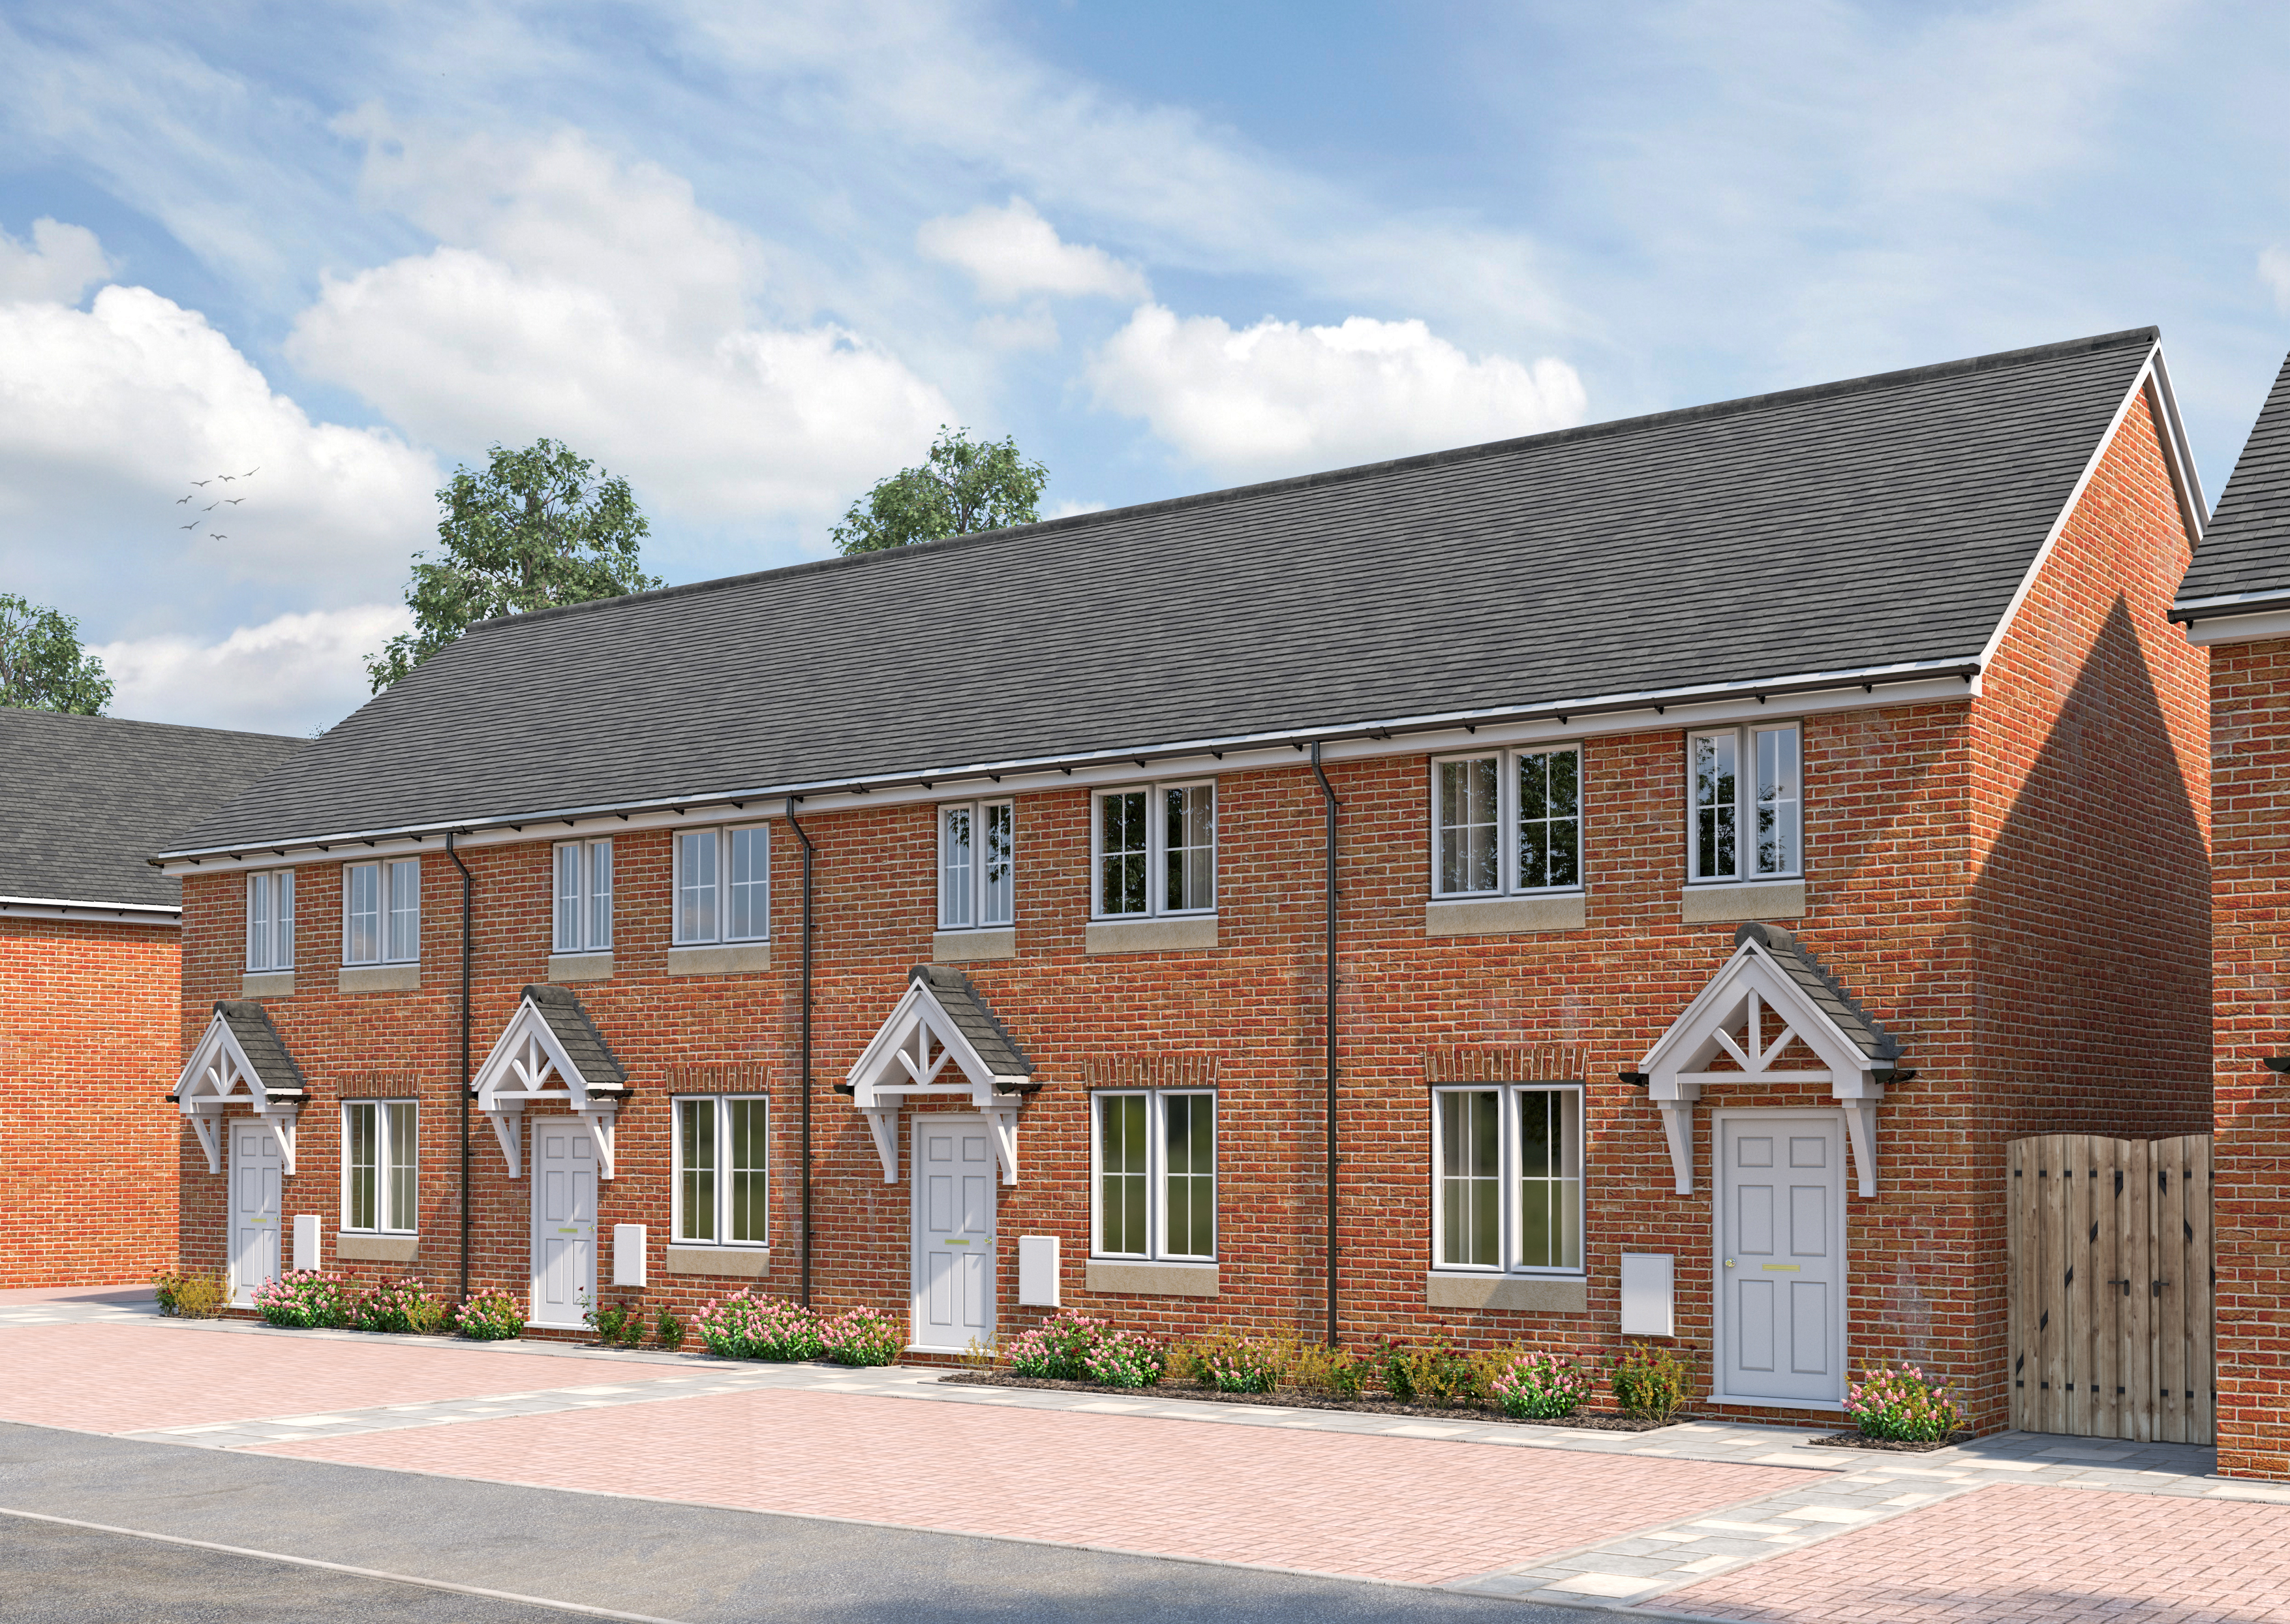 Galley Common Nuneaton Shared Ownership Homes For Sale